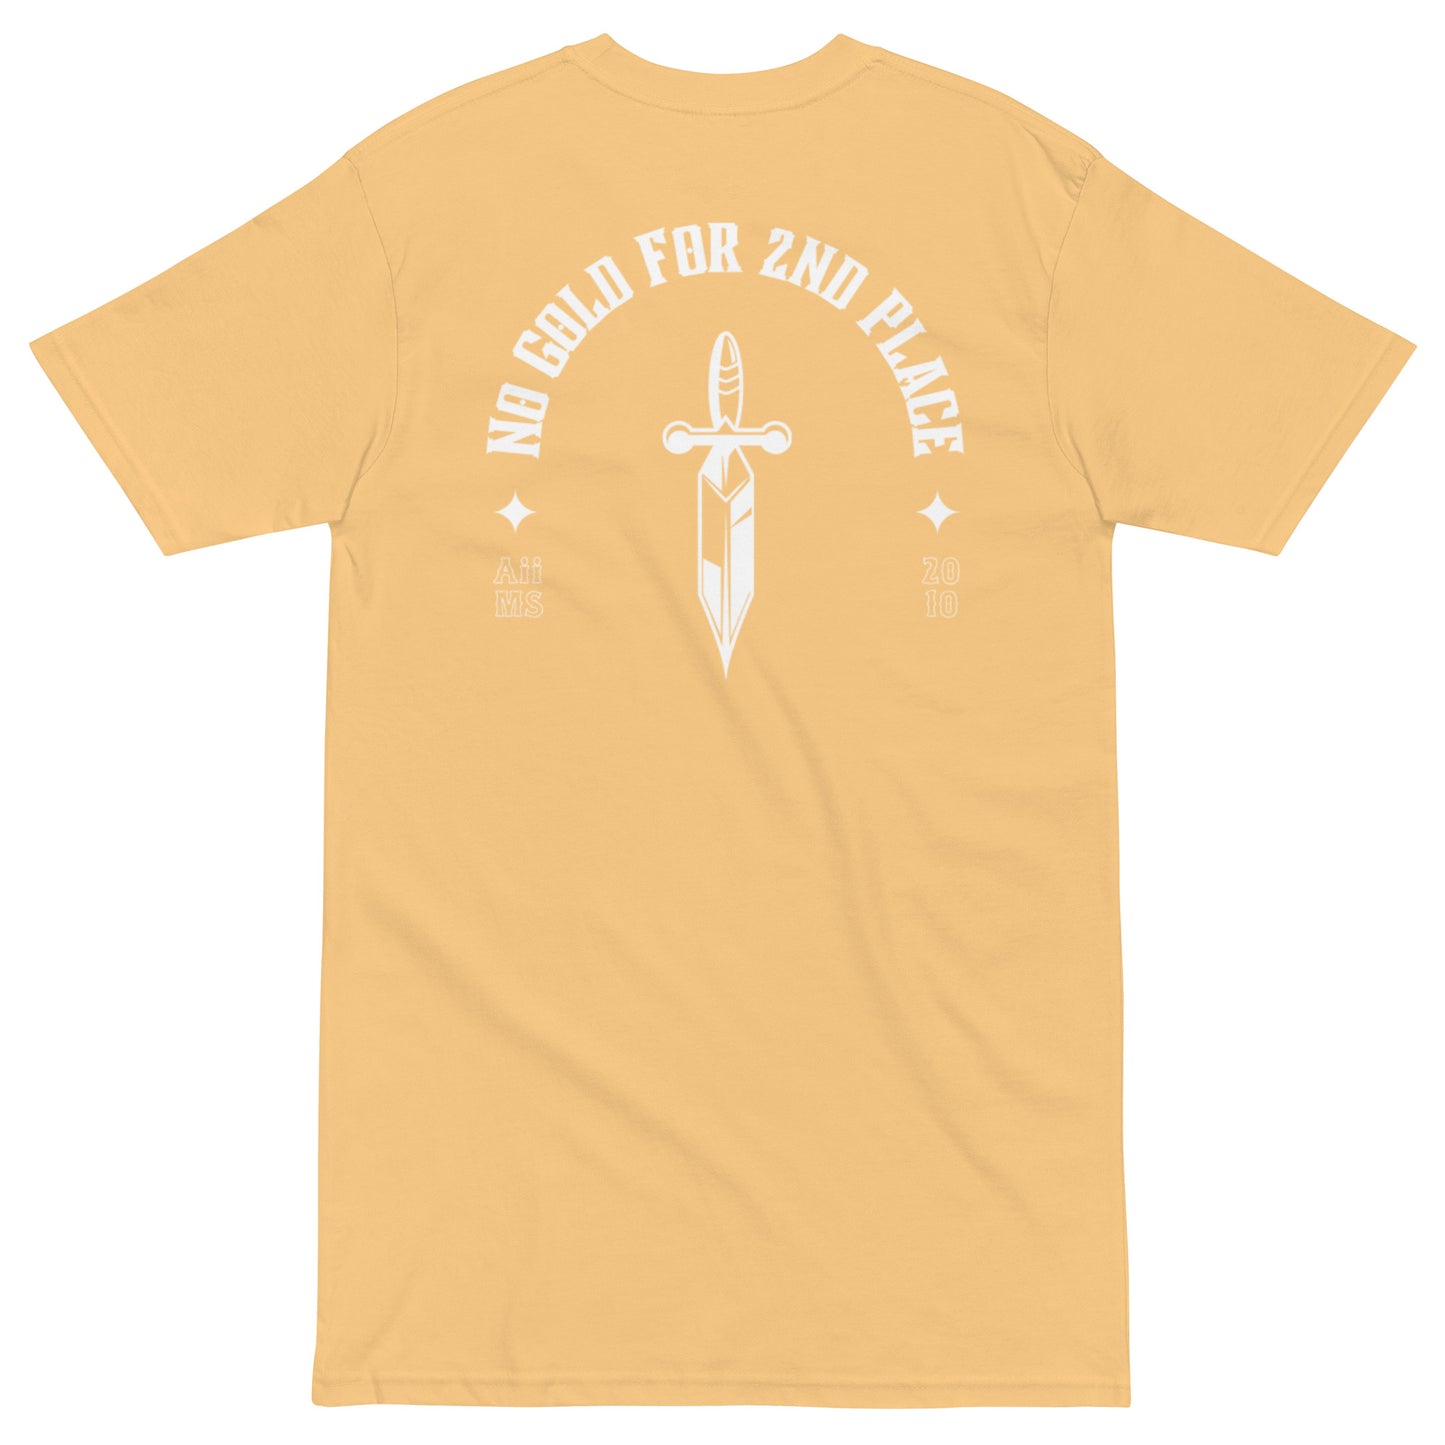 No Gold For Second Place Heavyweight Tee